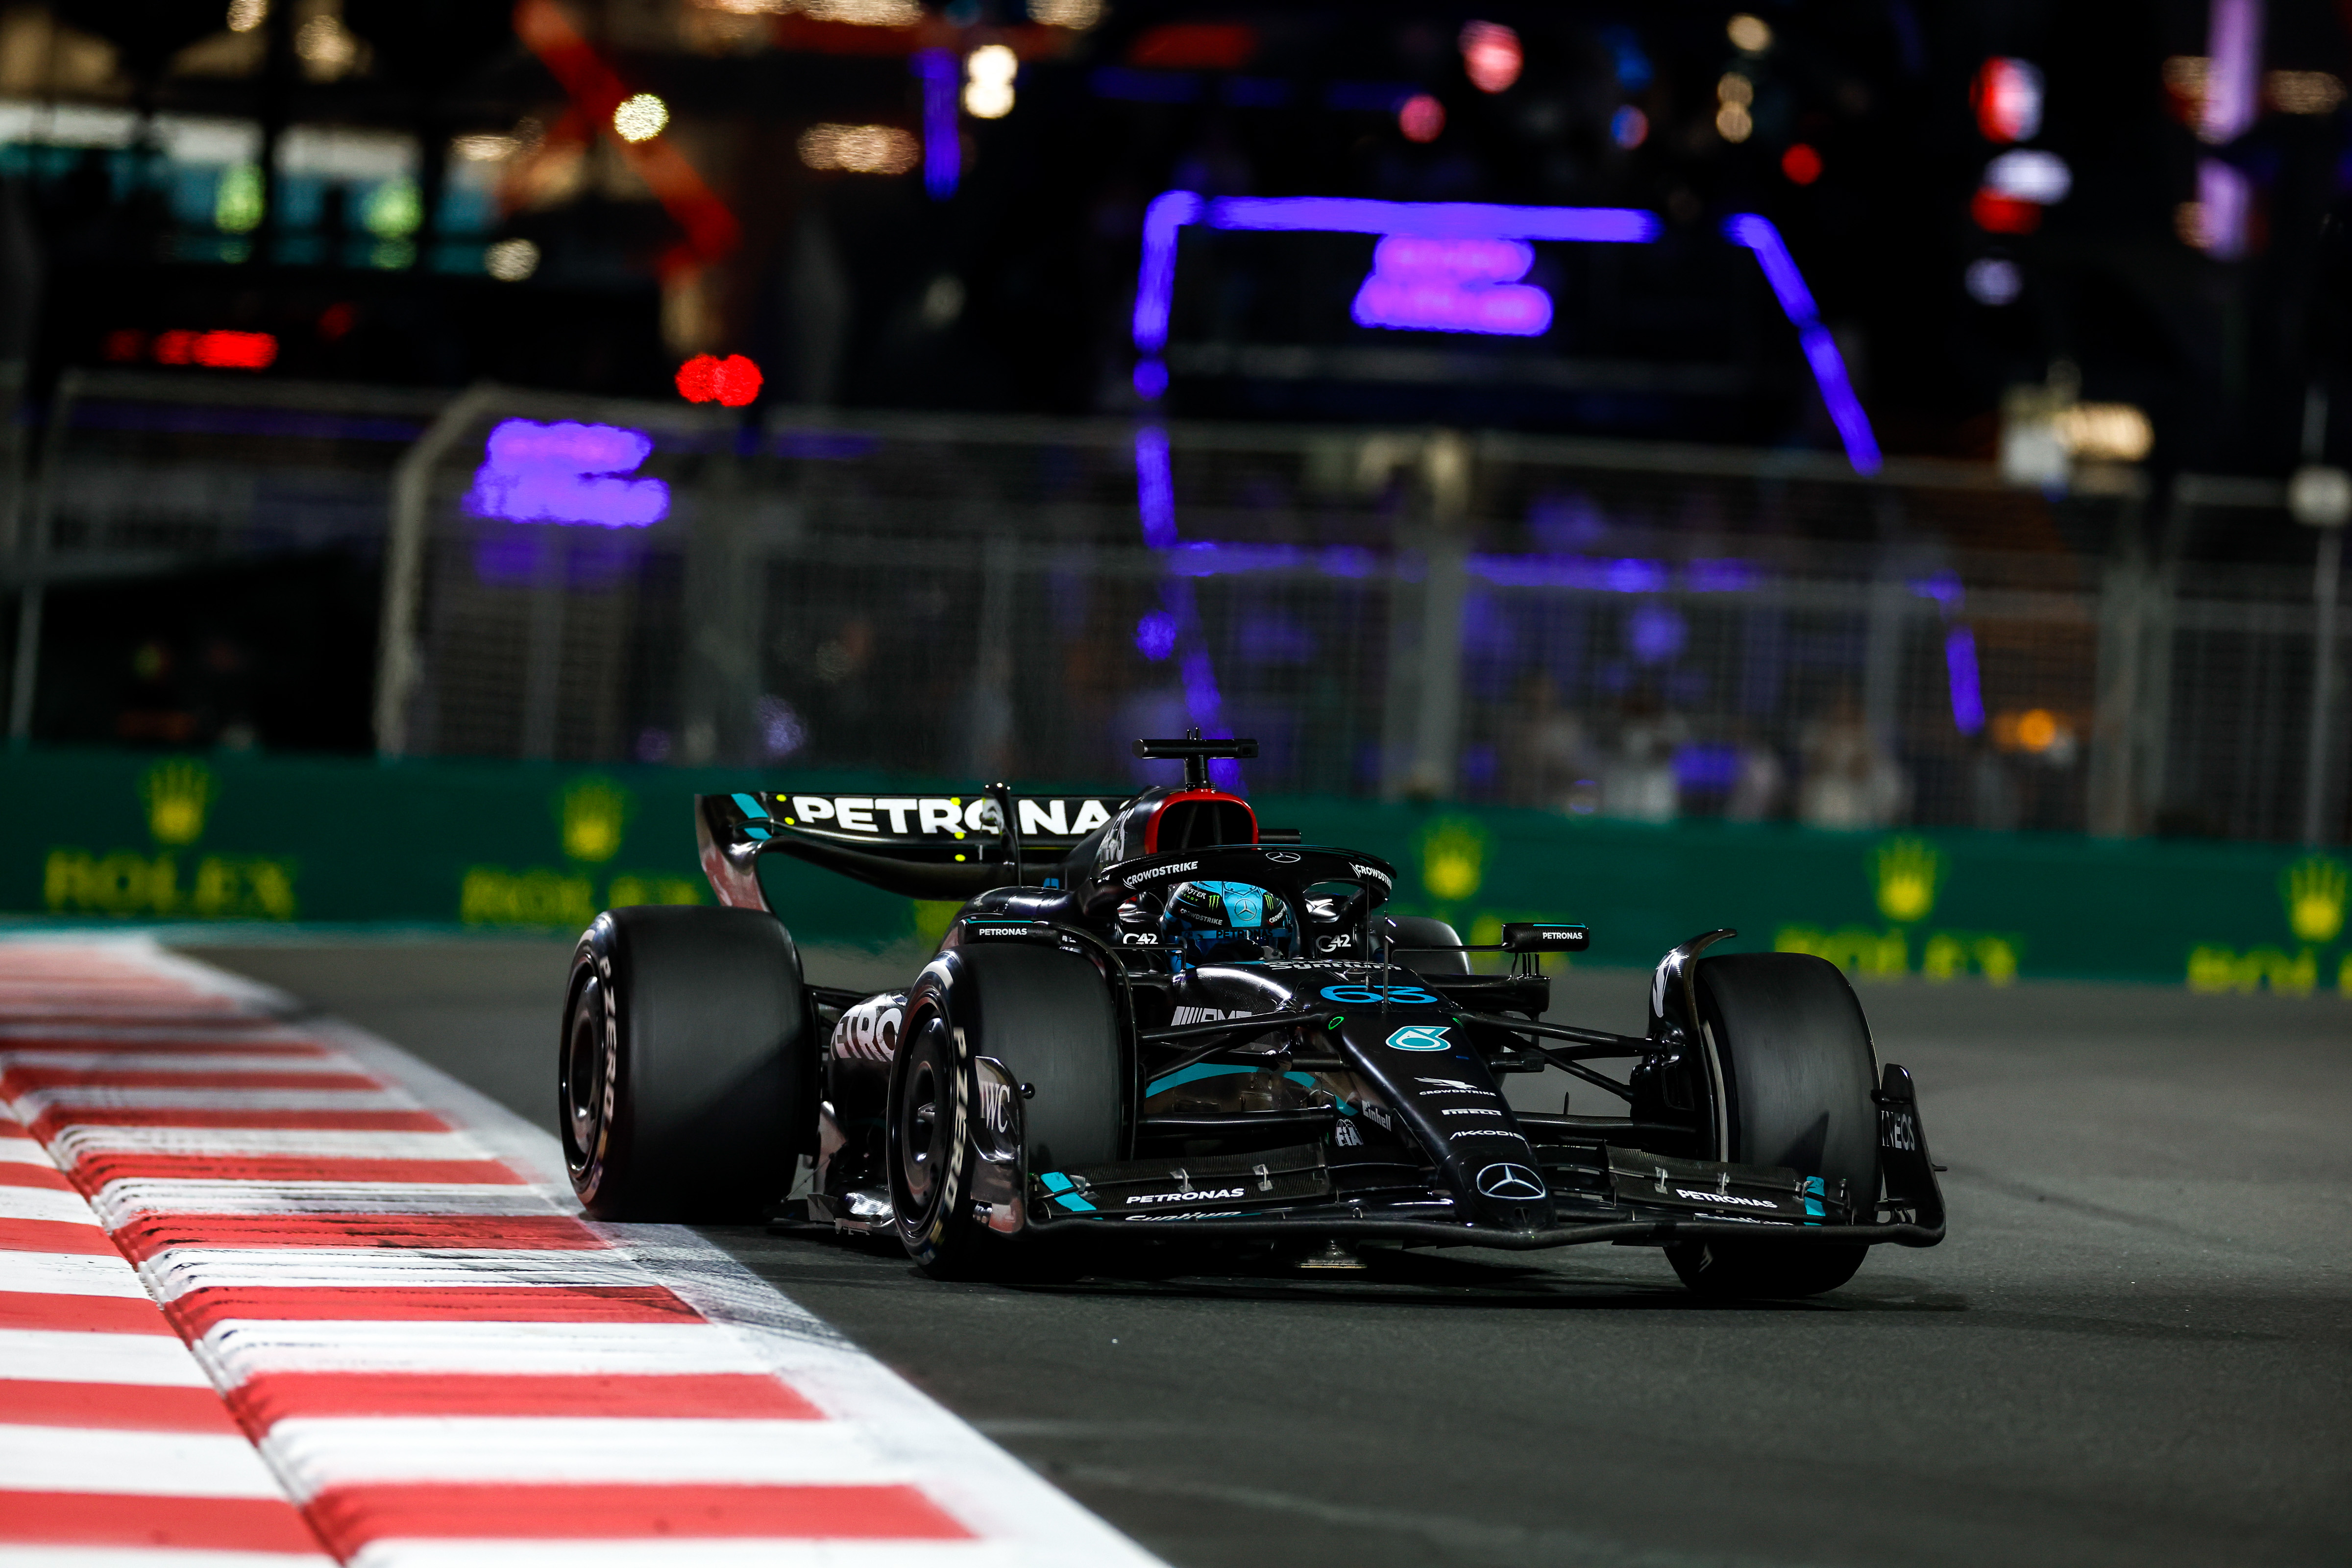 F1 News: Aston Martin Receives Mercedes Upgrades As Requested By Lewis  Hamilton - F1 Briefings: Formula 1 News, Rumors, Standings and More